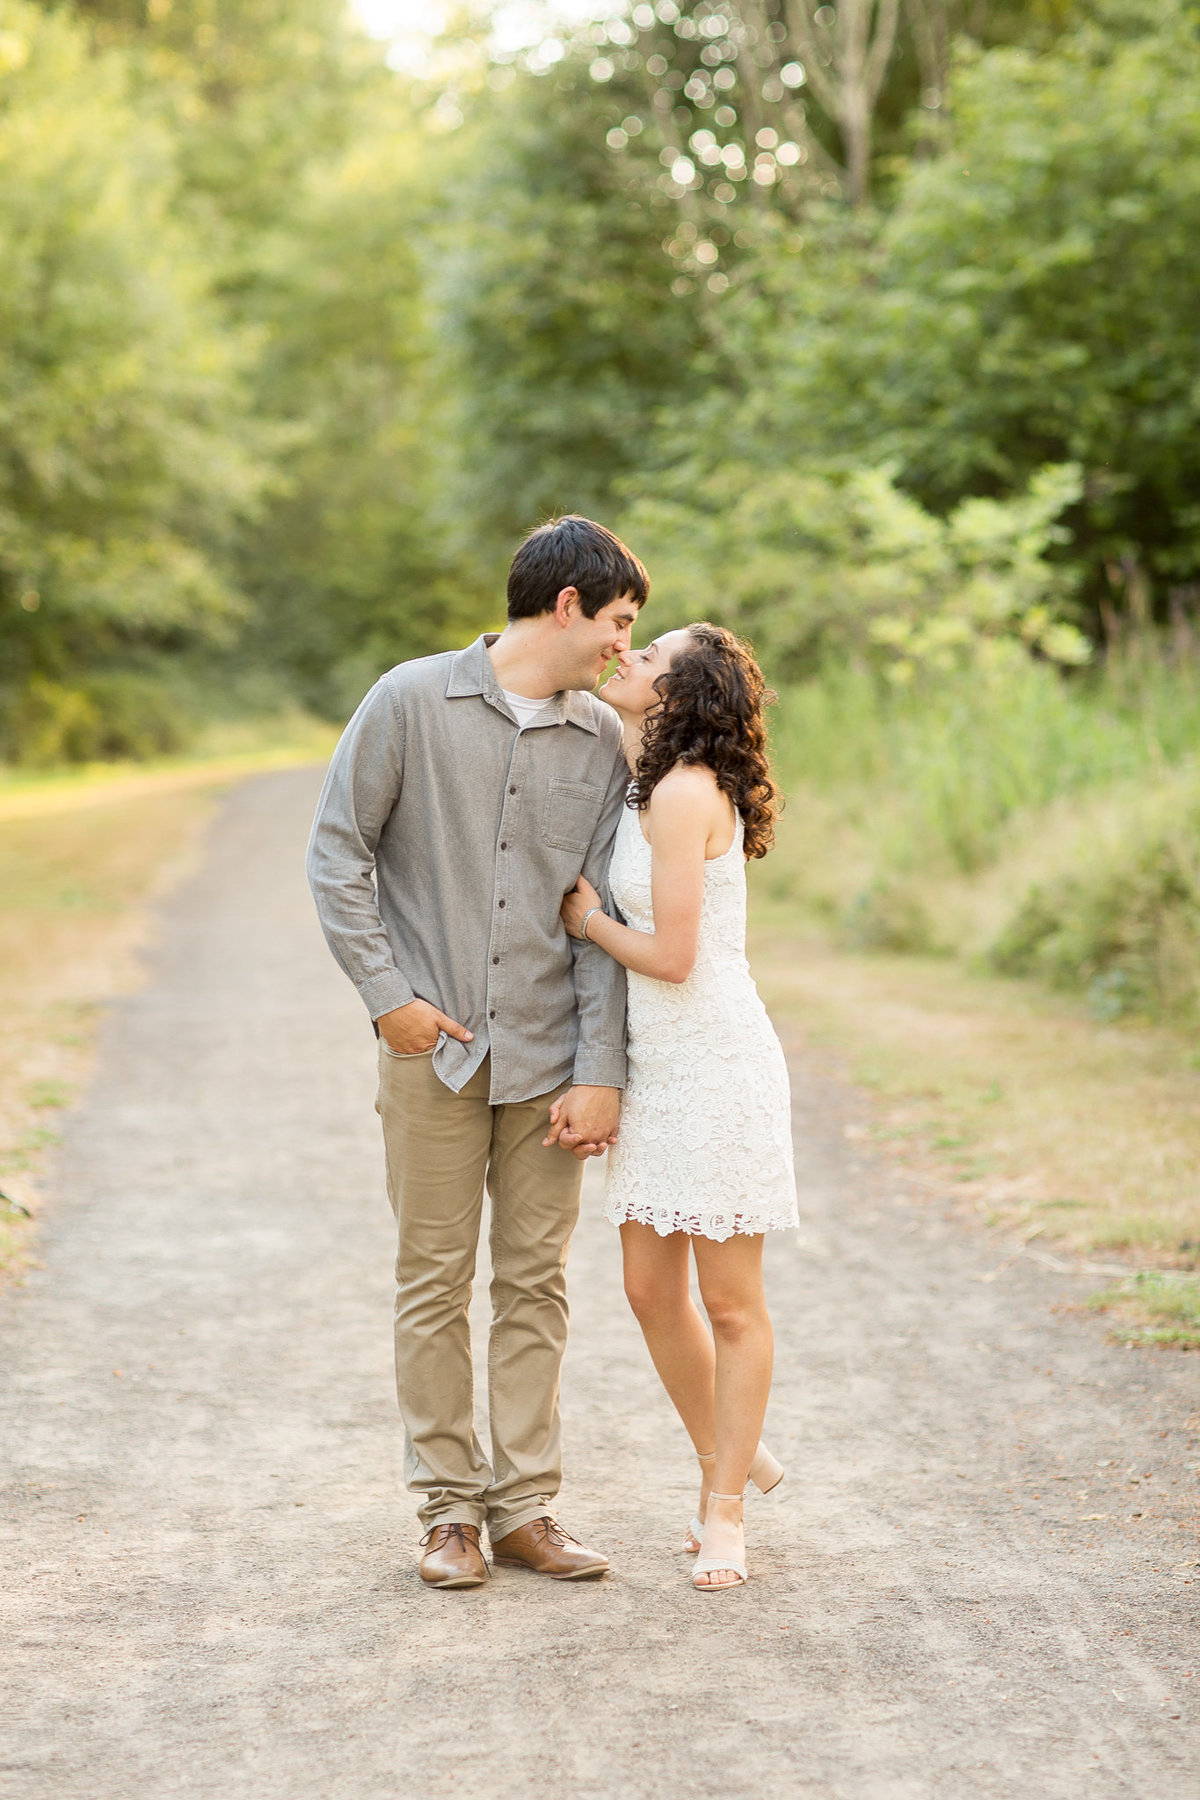 Blake & Annie | Previews | Emily Moller Photography (3 of 5)